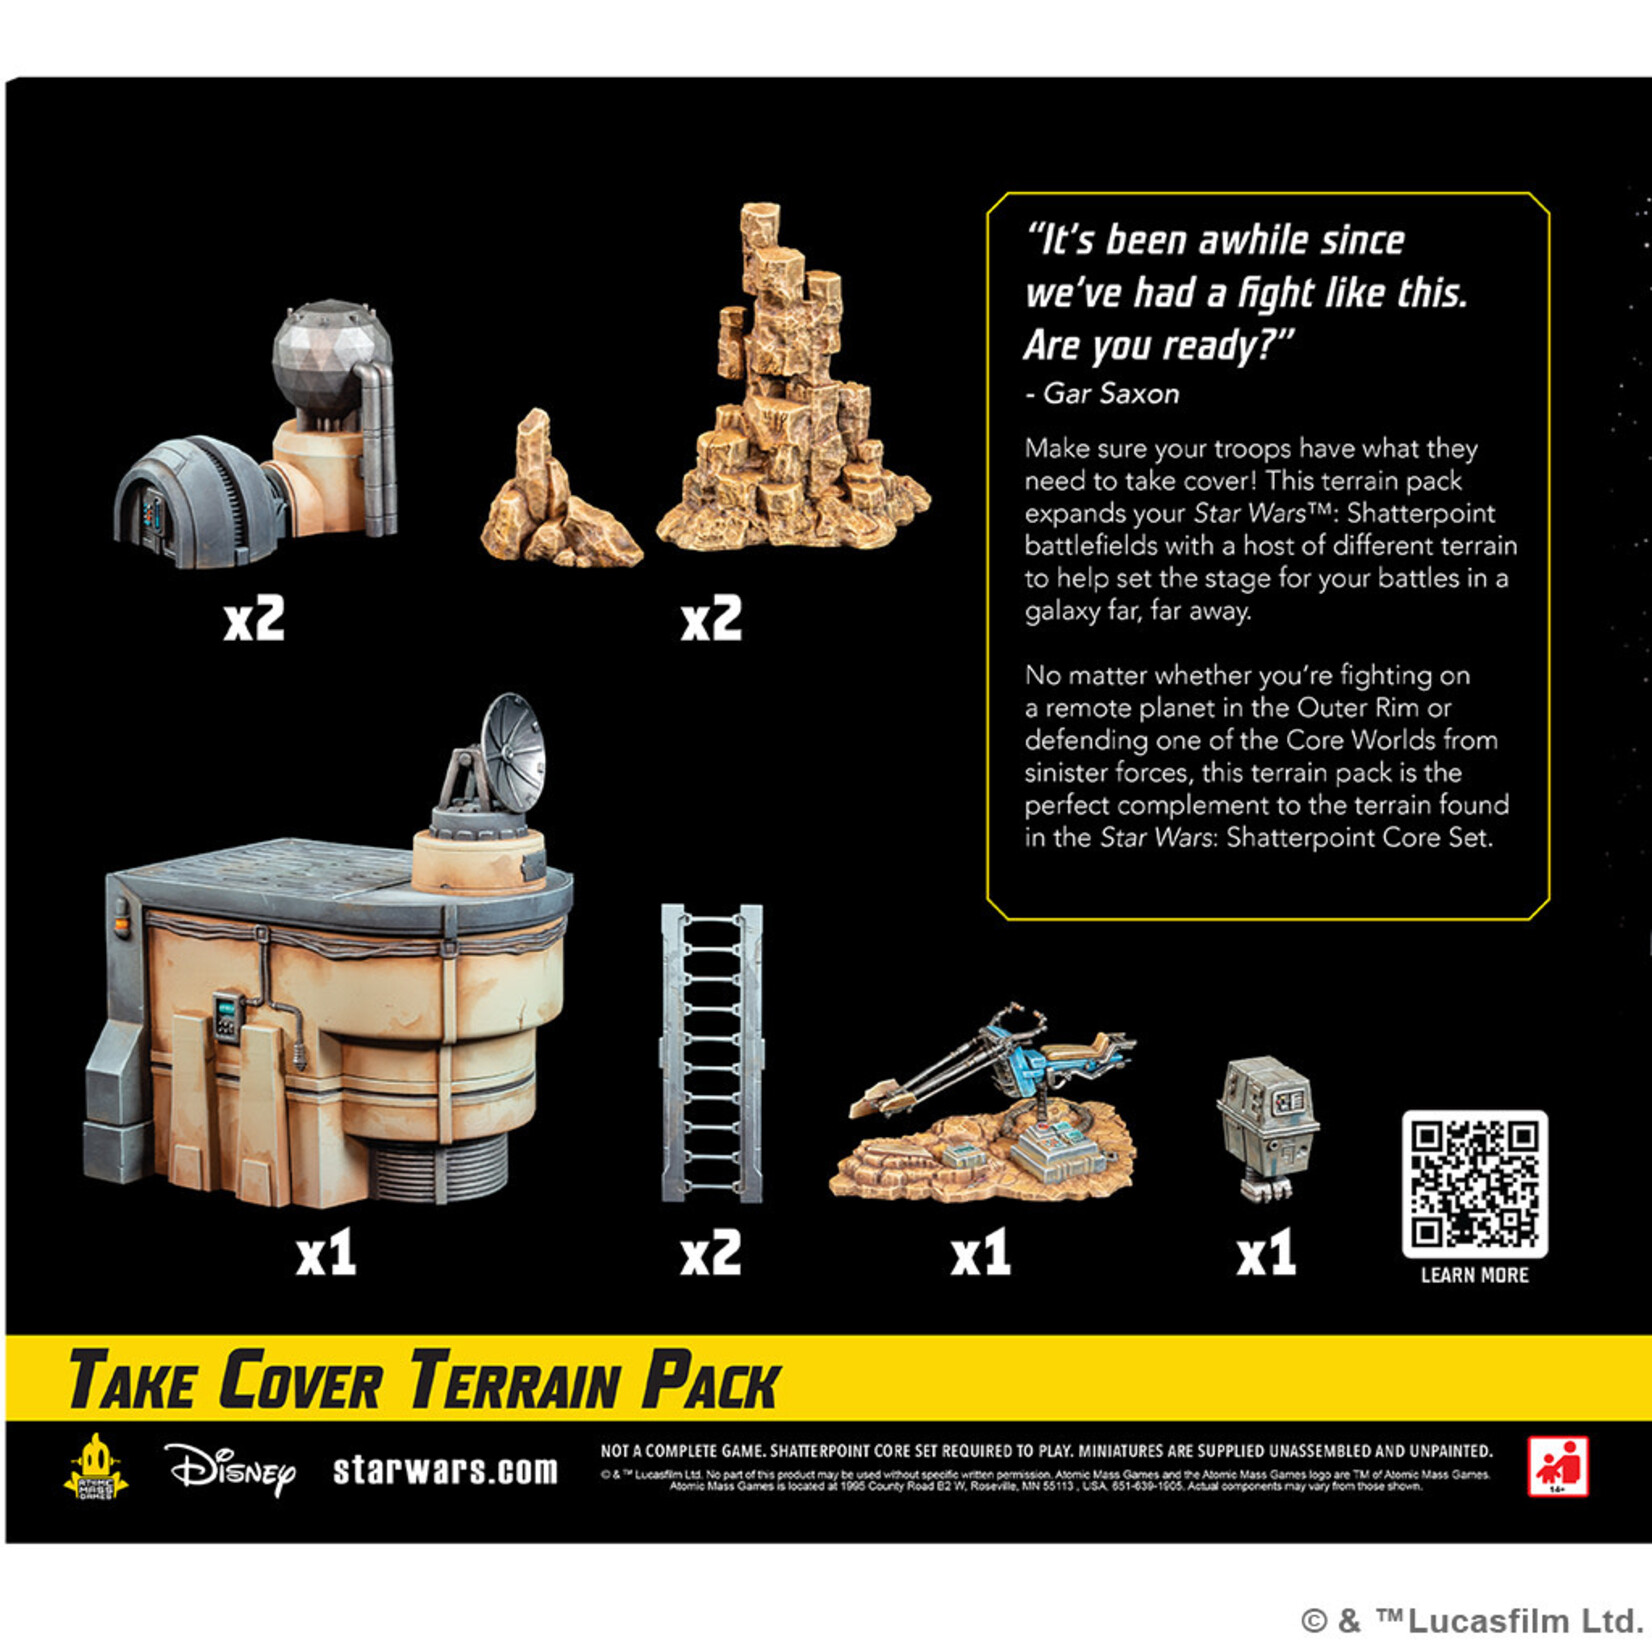 Atomic Mass Games Star Wars: Shatterpoint Take Cover Terrain Pack